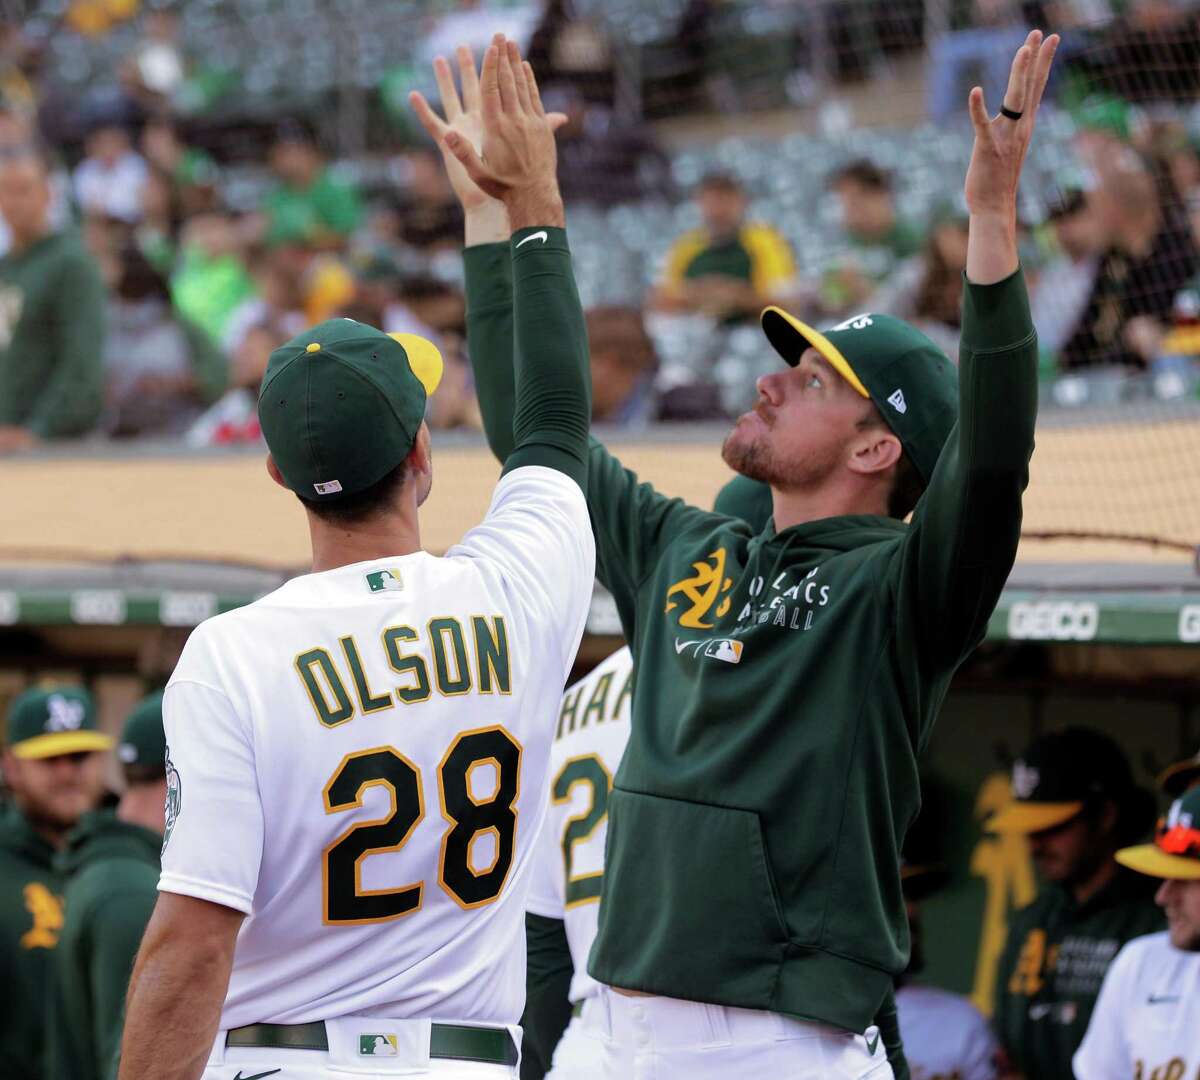 Matt Olson (28) and Chris Bassitt (40) gesture in the dugout before the Oakland Athletics played the Texas Rangers at the Coliseum in Oakland, Calif., on Tuesday, June 29, 2021.